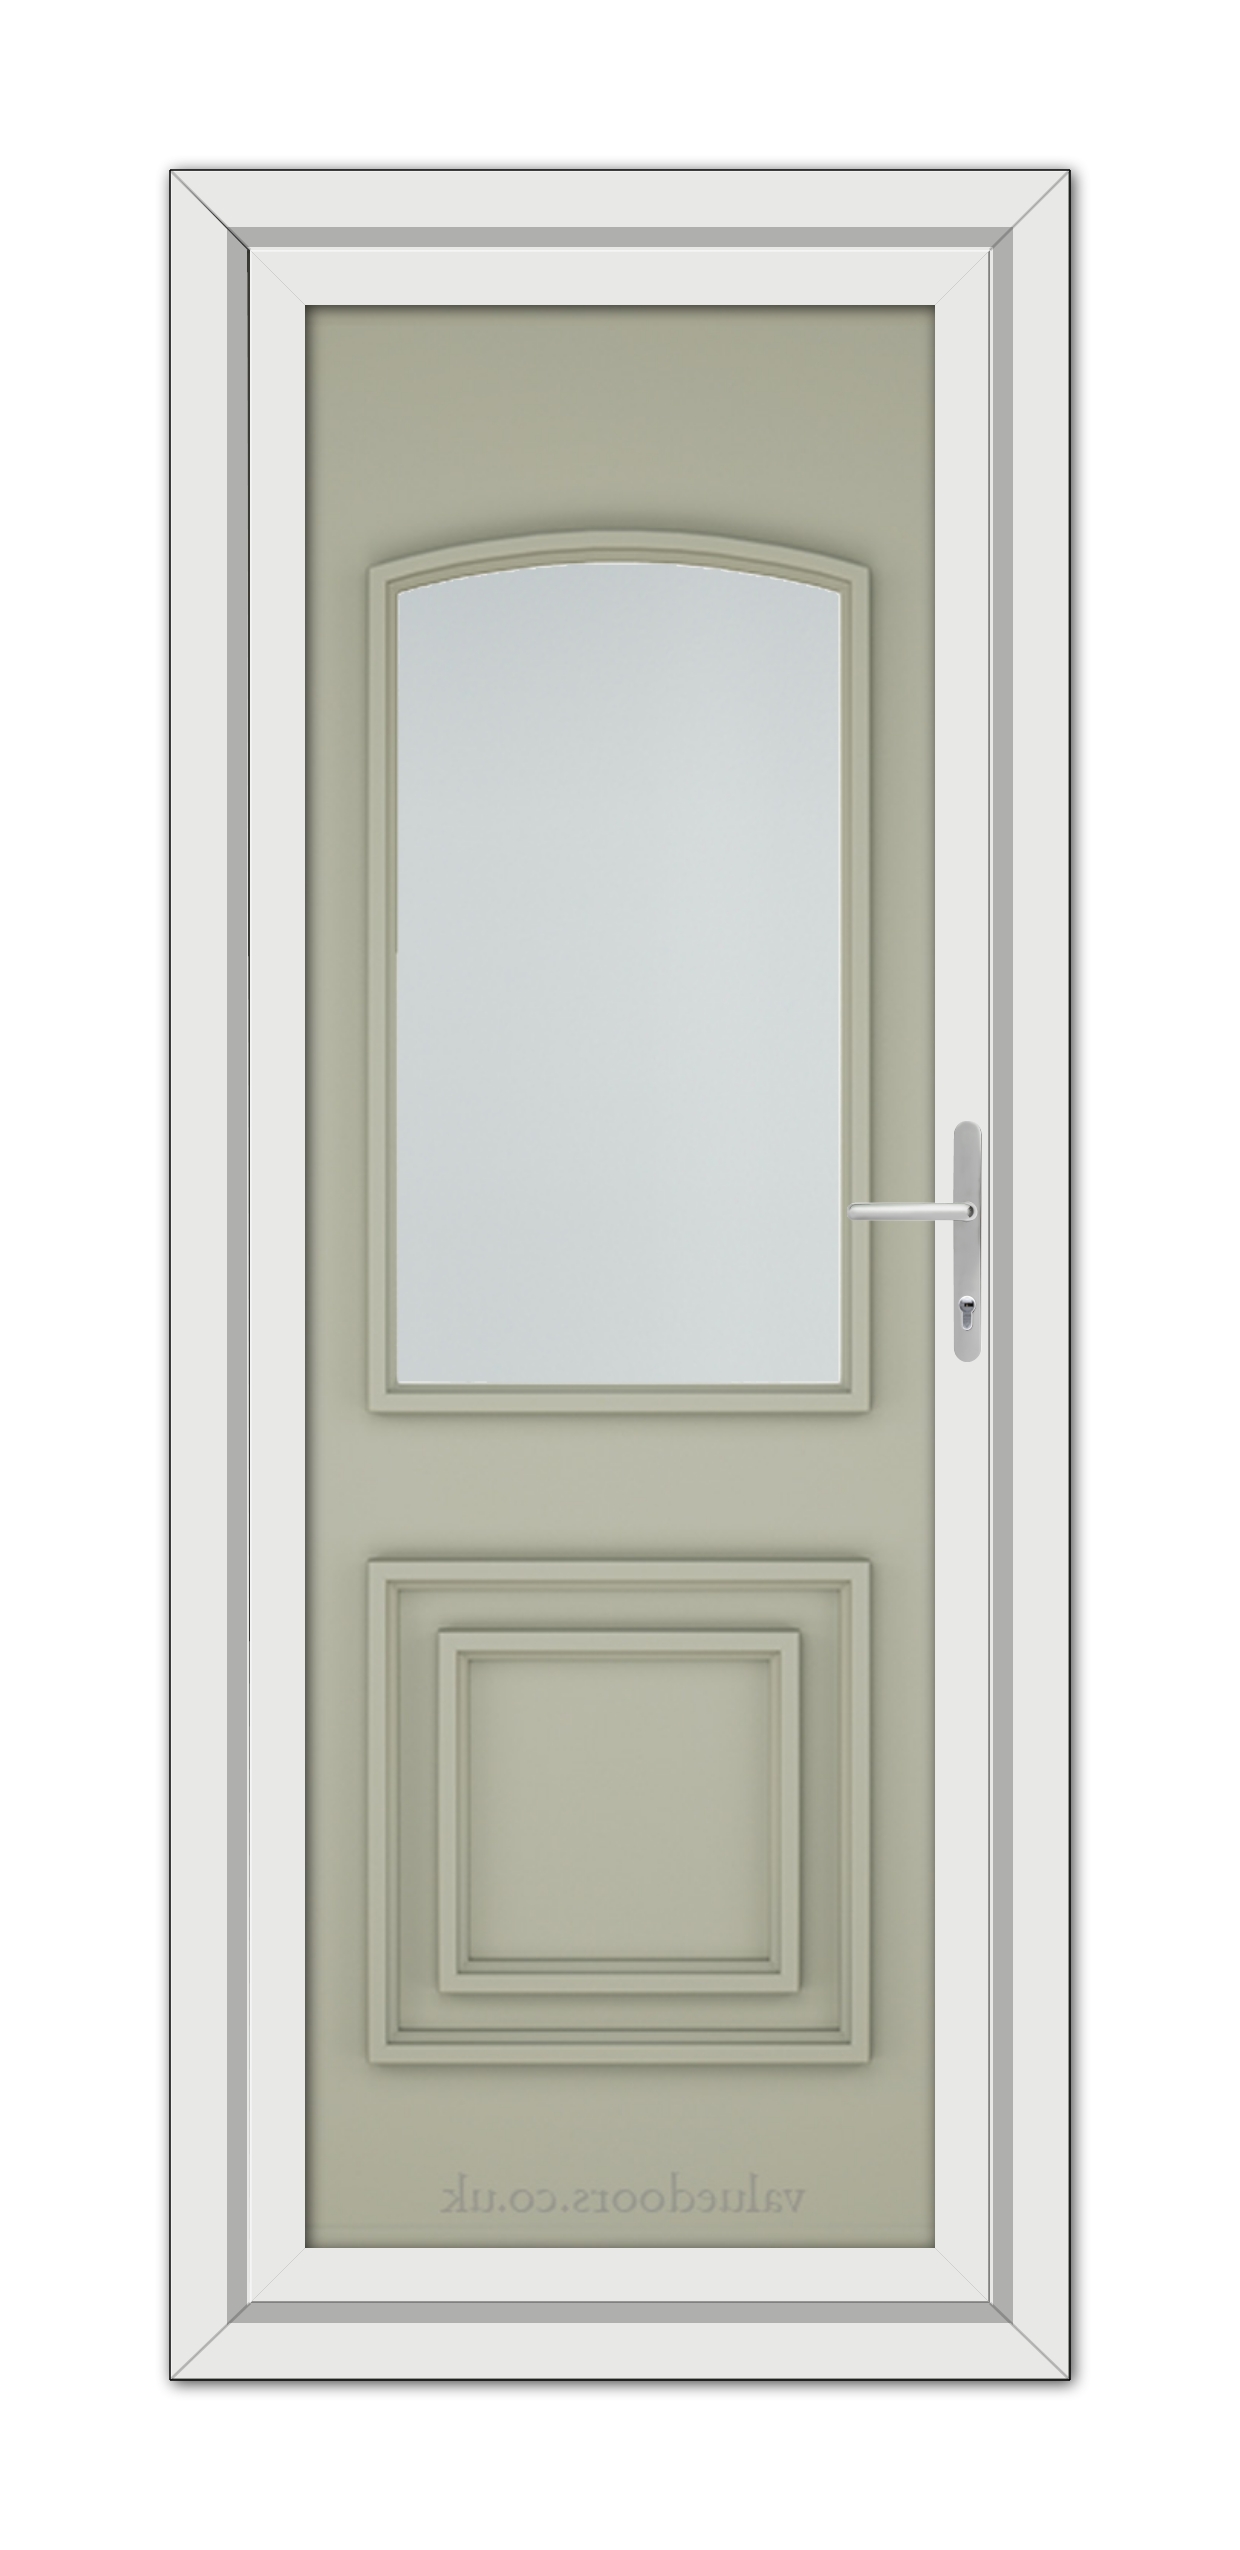 A vertical image of a closed Agate Grey Balmoral Classic uPVC door with a small oval window, set within a white door frame, isolated on a white background.